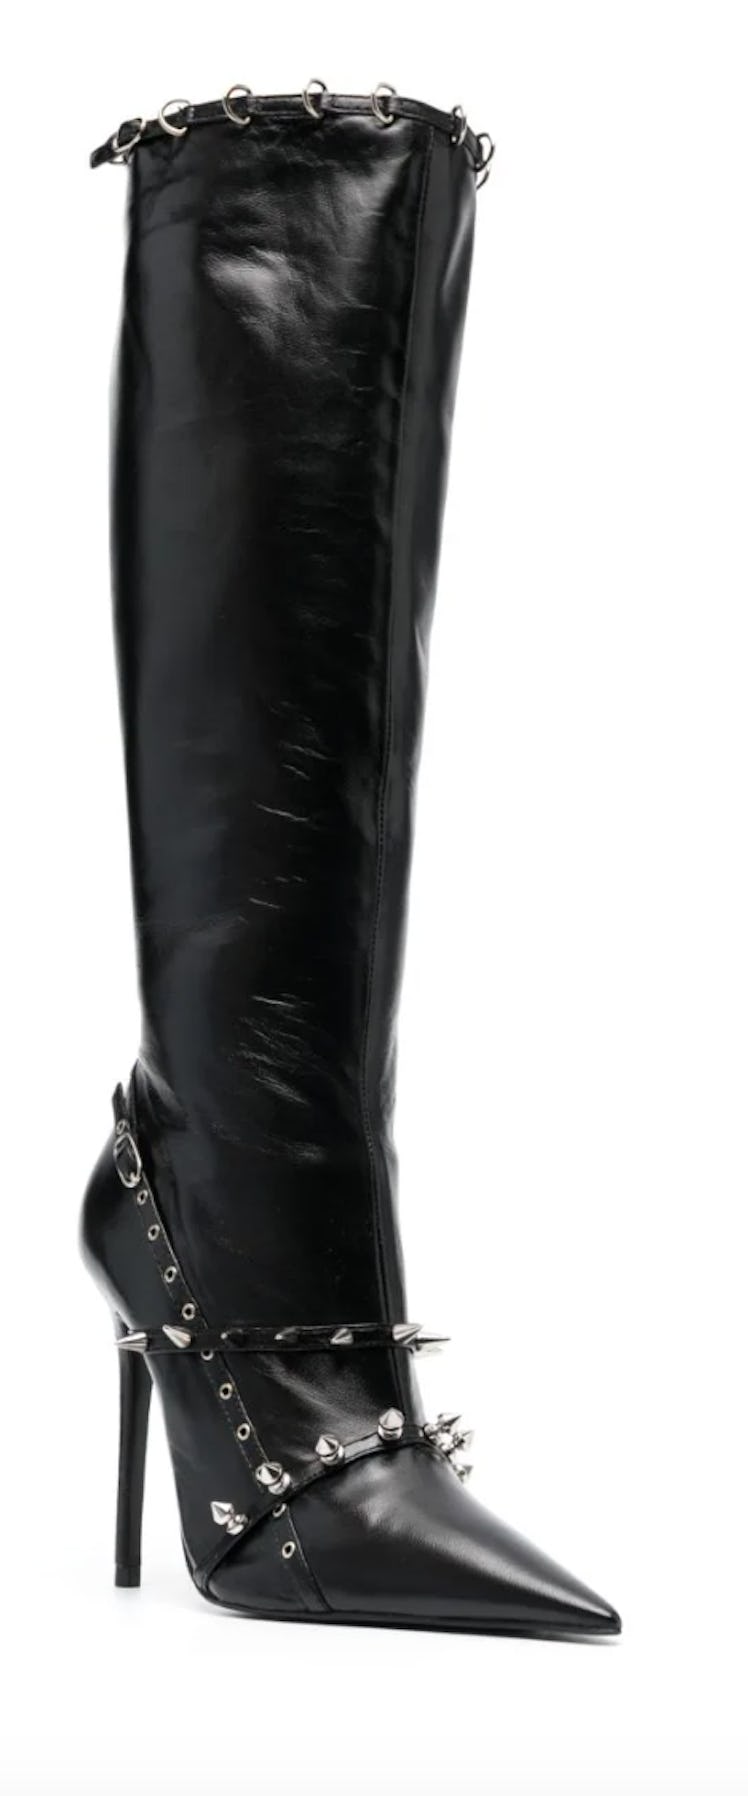 black spiked knee-high boots